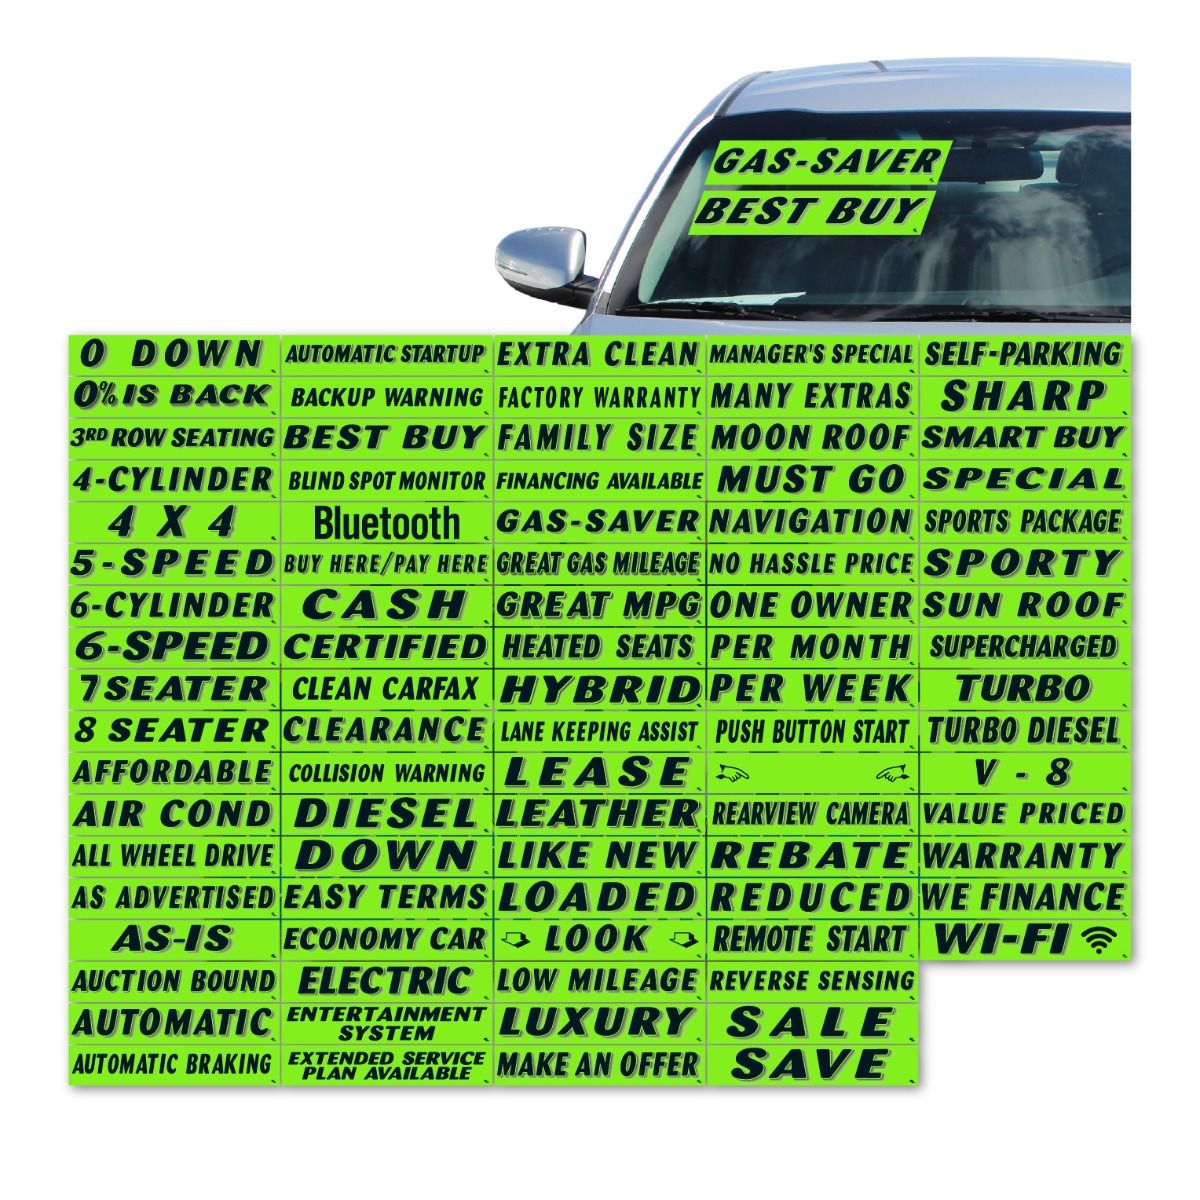 Quality Auto Sticker Chevrolet For Your Most Loved Slogans